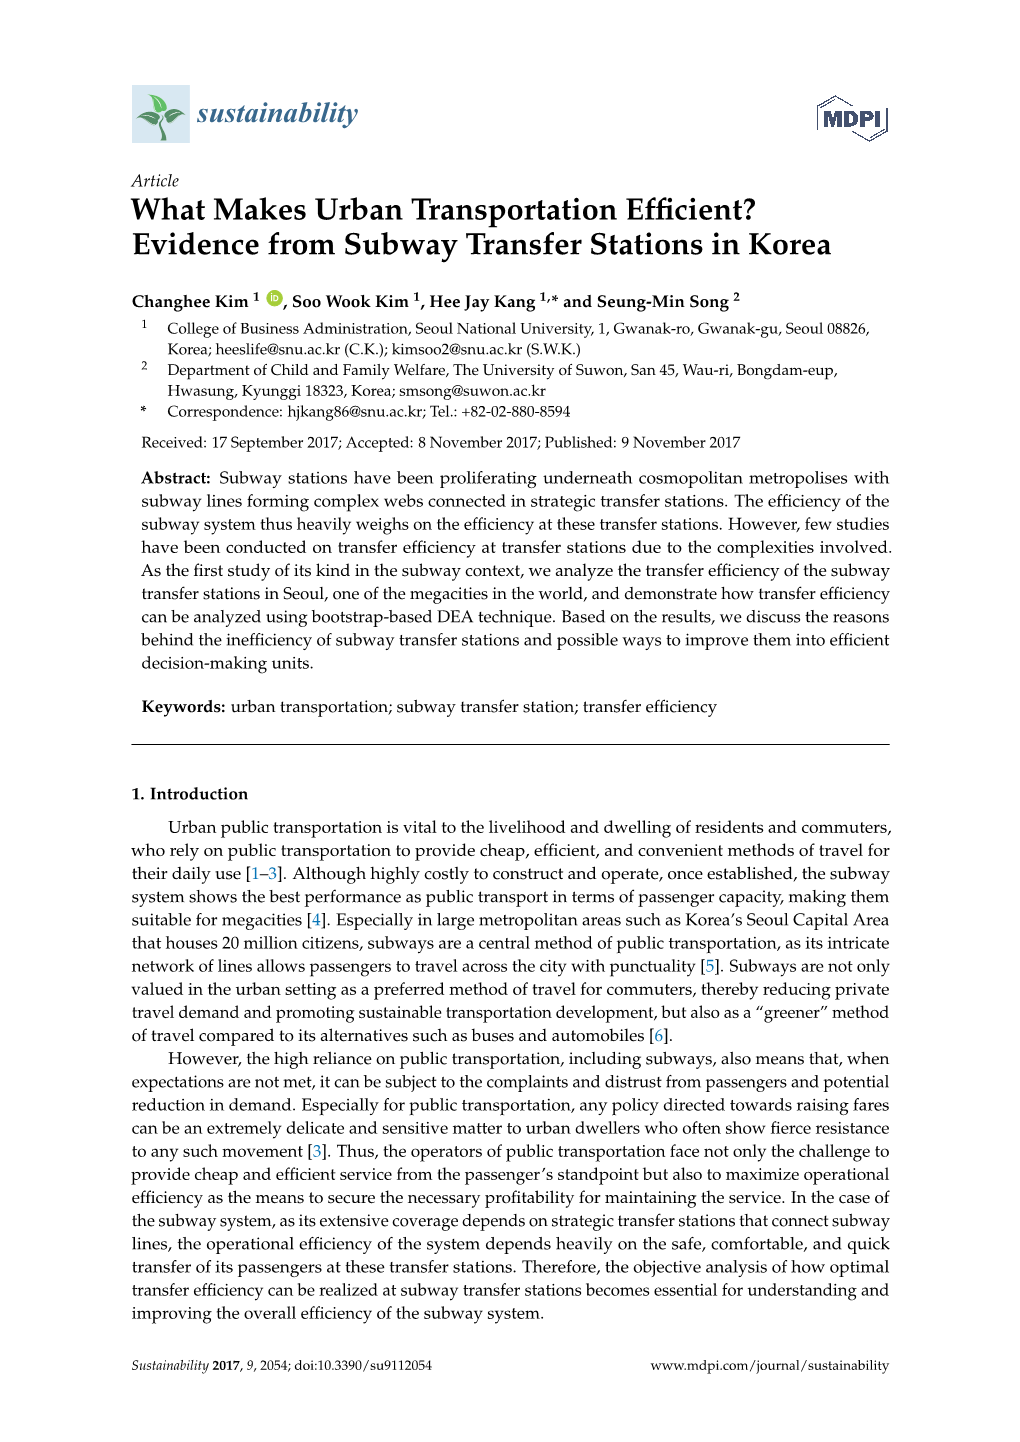 Evidence from Subway Transfer Stations in Korea